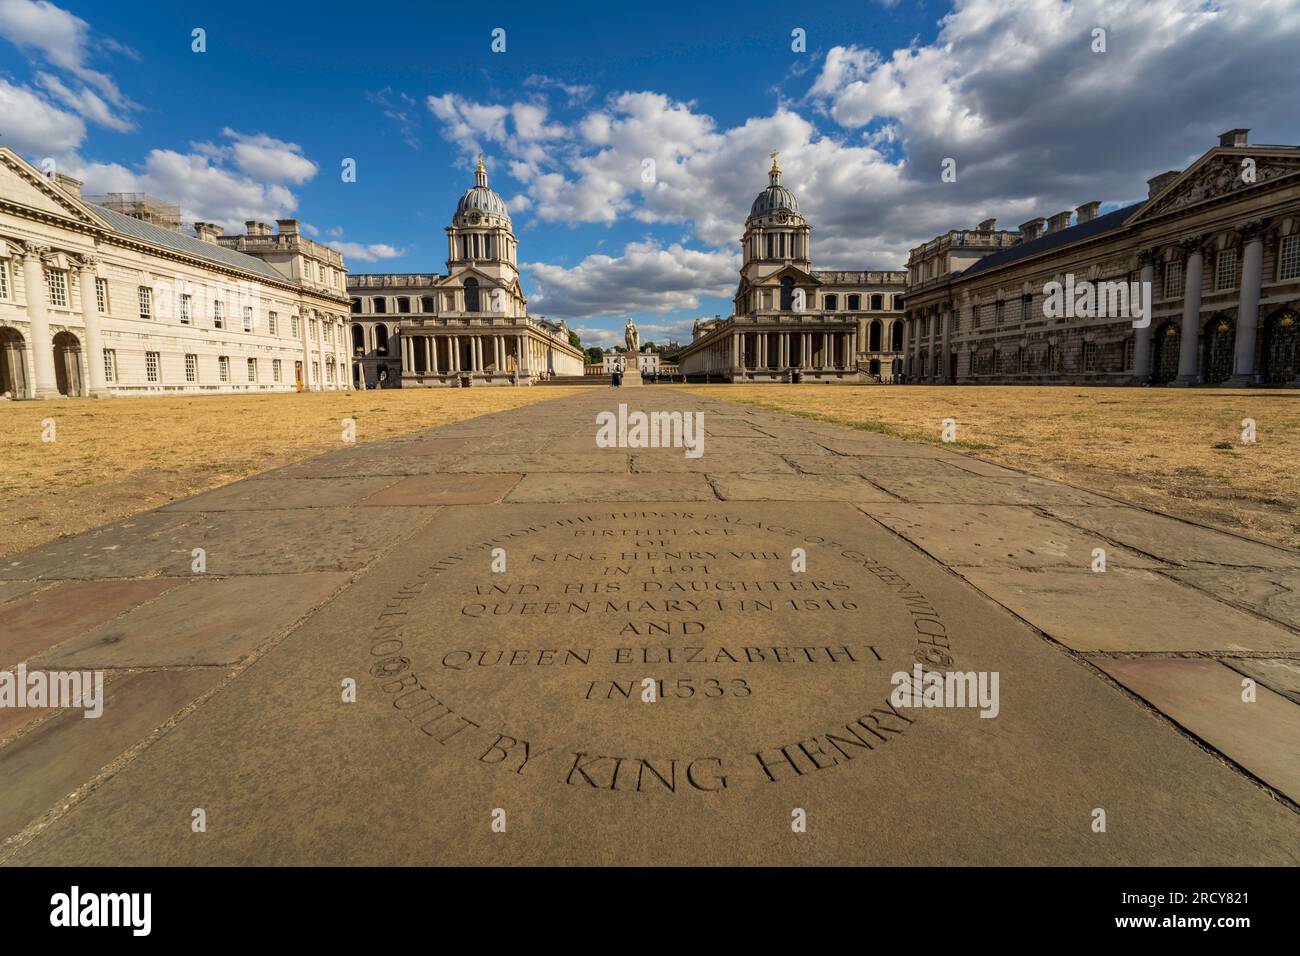 Greenwich cityscape. A London borough and the birthplace of King Henry VIII, Queen Mary I and Elizabeth I. Visit the Royal museums and Observatory. Stock Photo